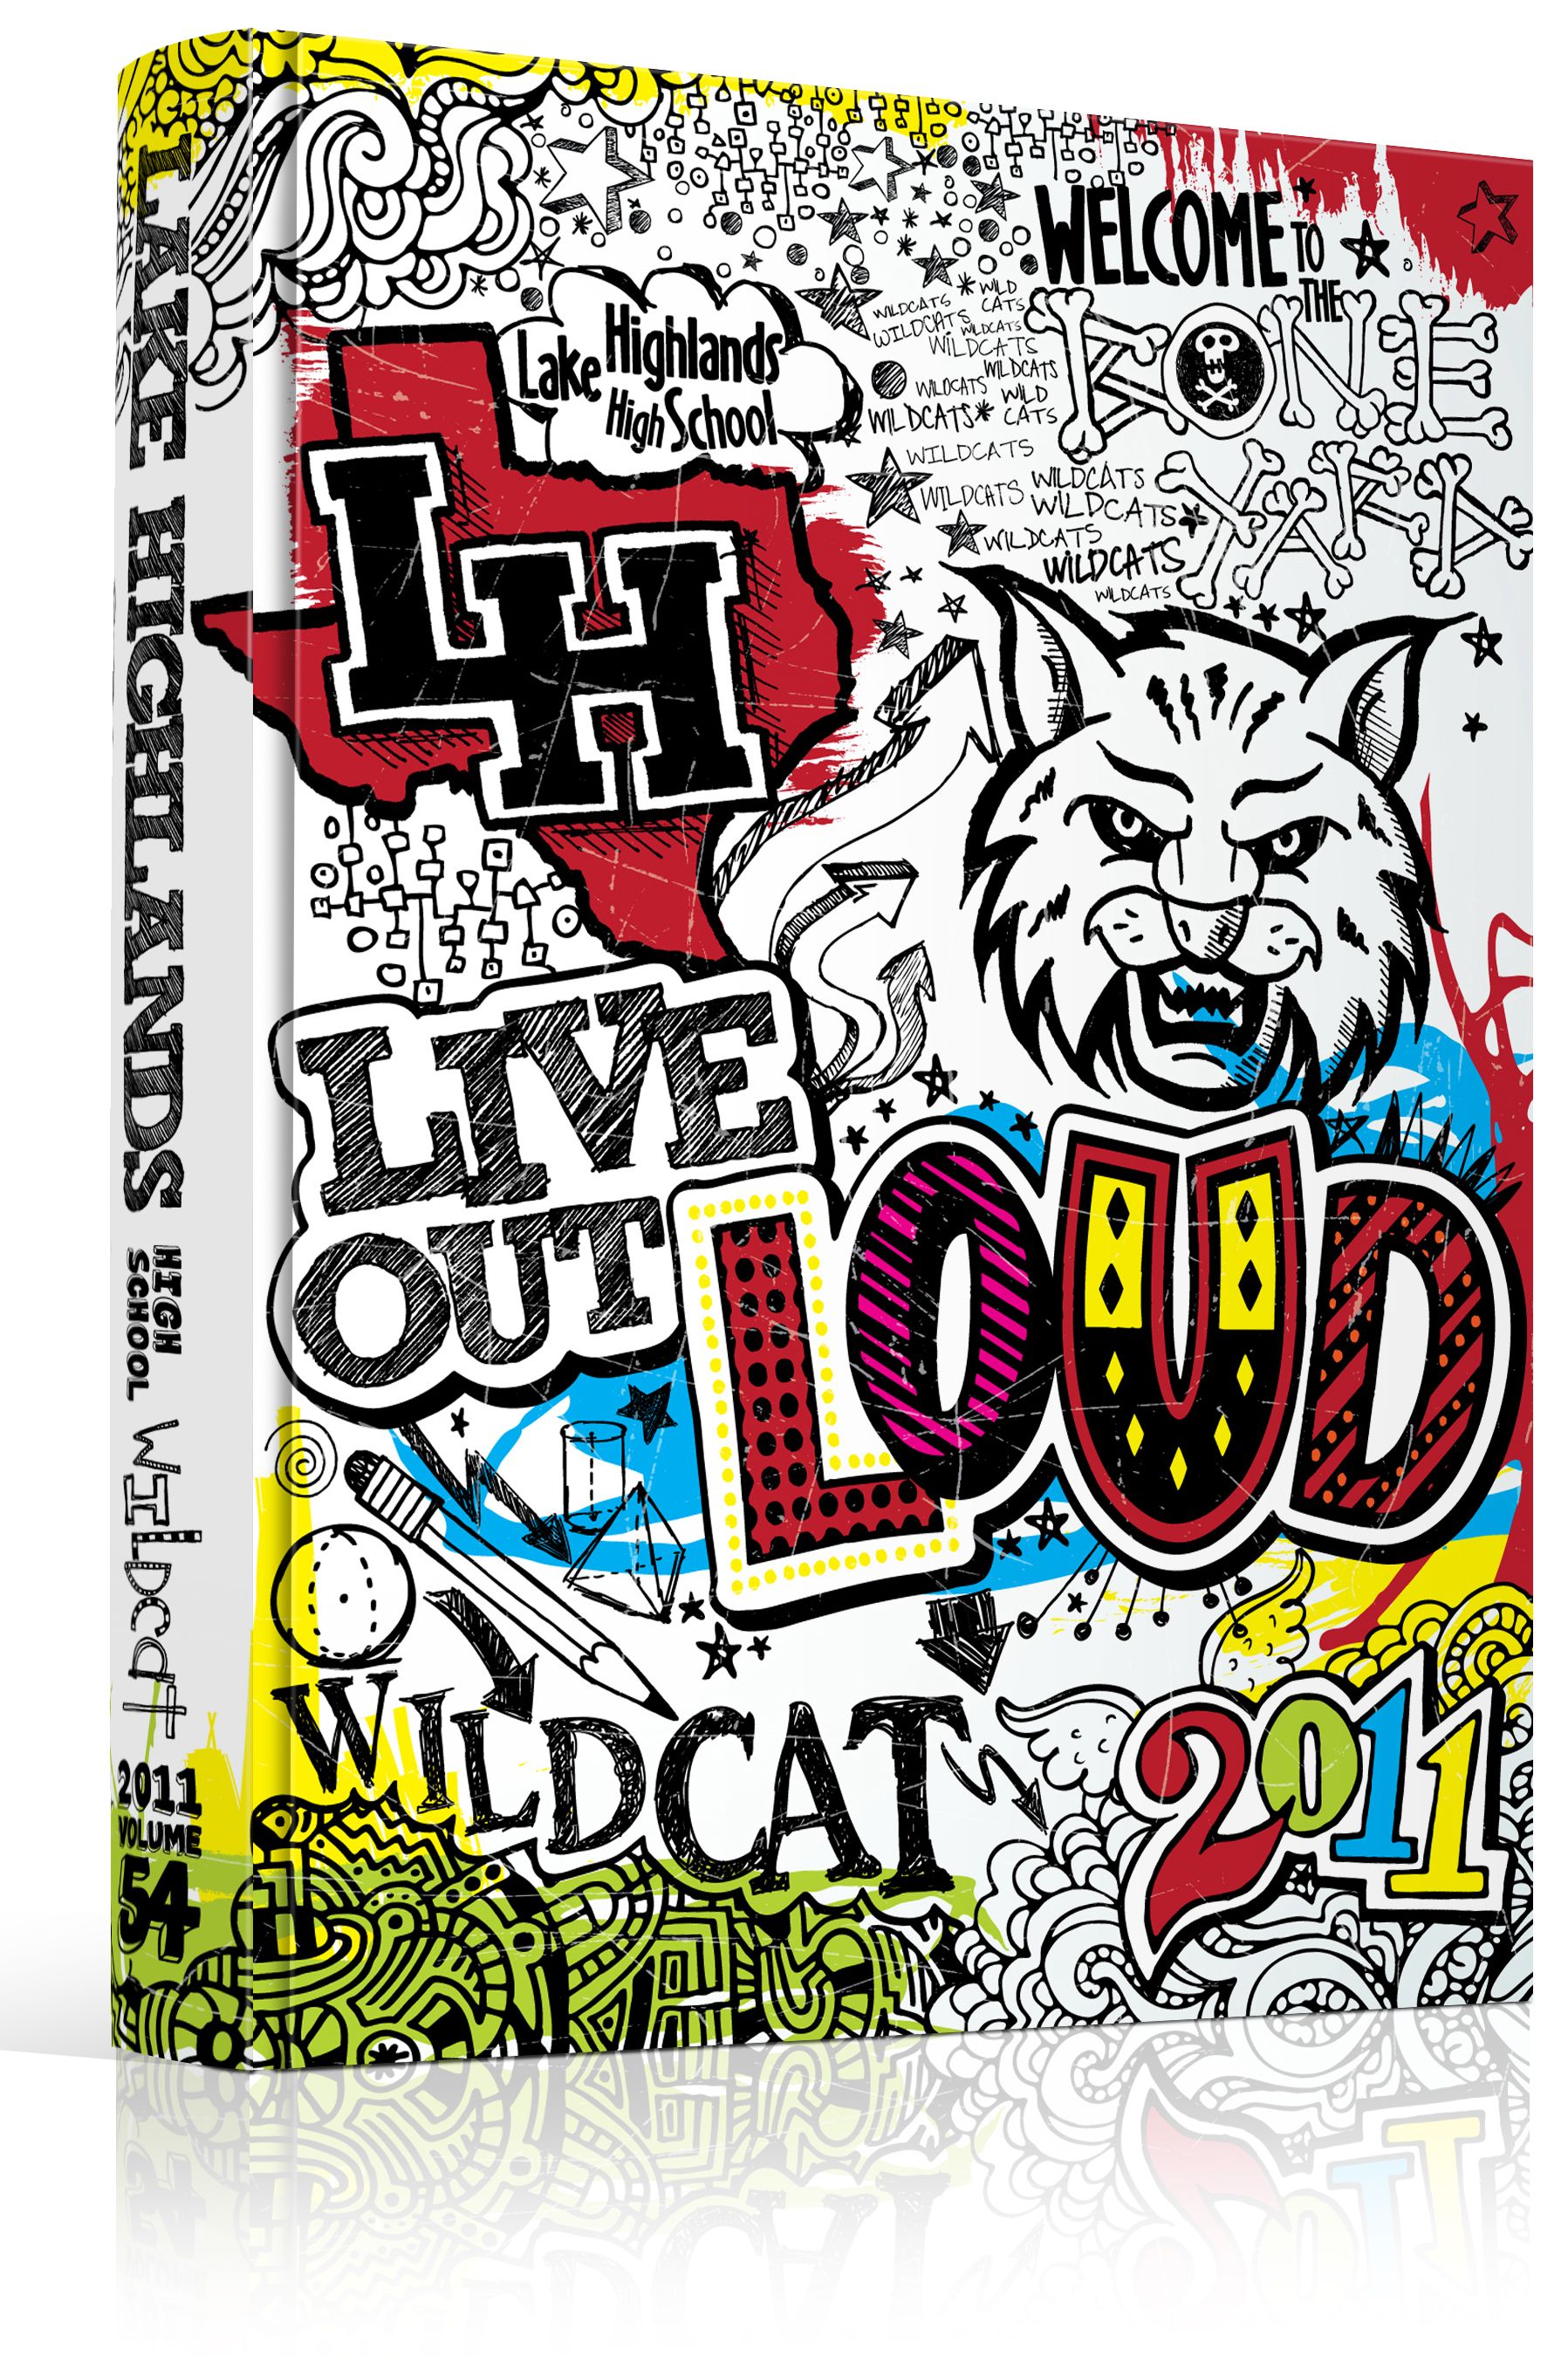 High School Yearbook Cover Designs